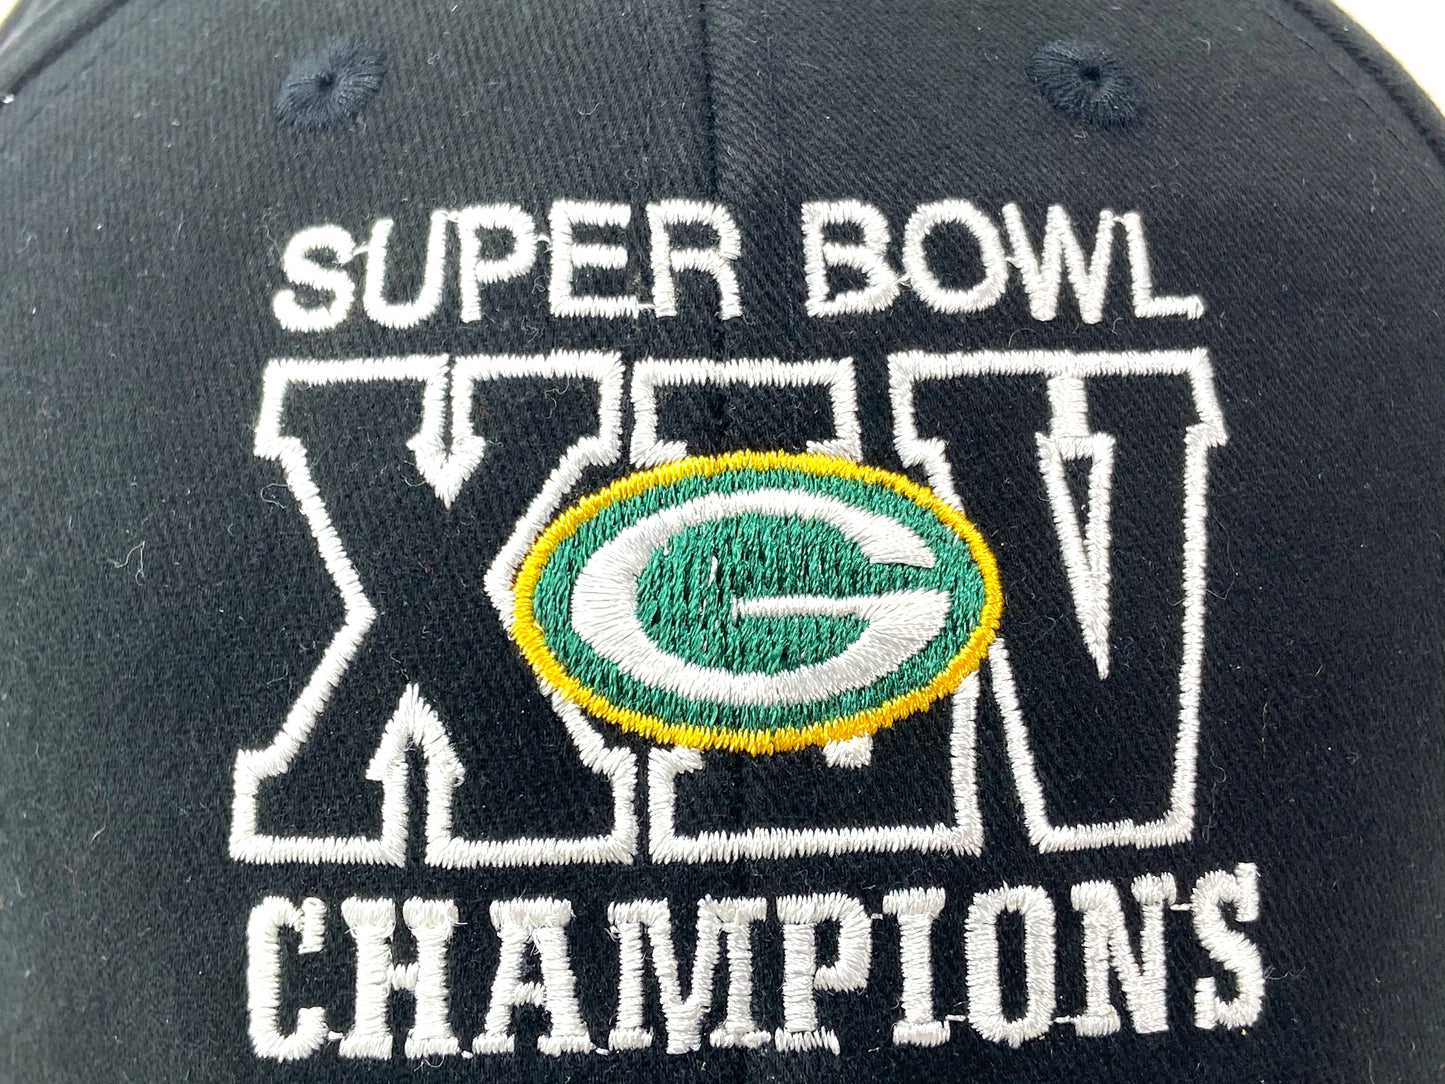 Green Bay Packers Super Bowl XLV (45) Champs 2010 Season NOS by Nissin Cap